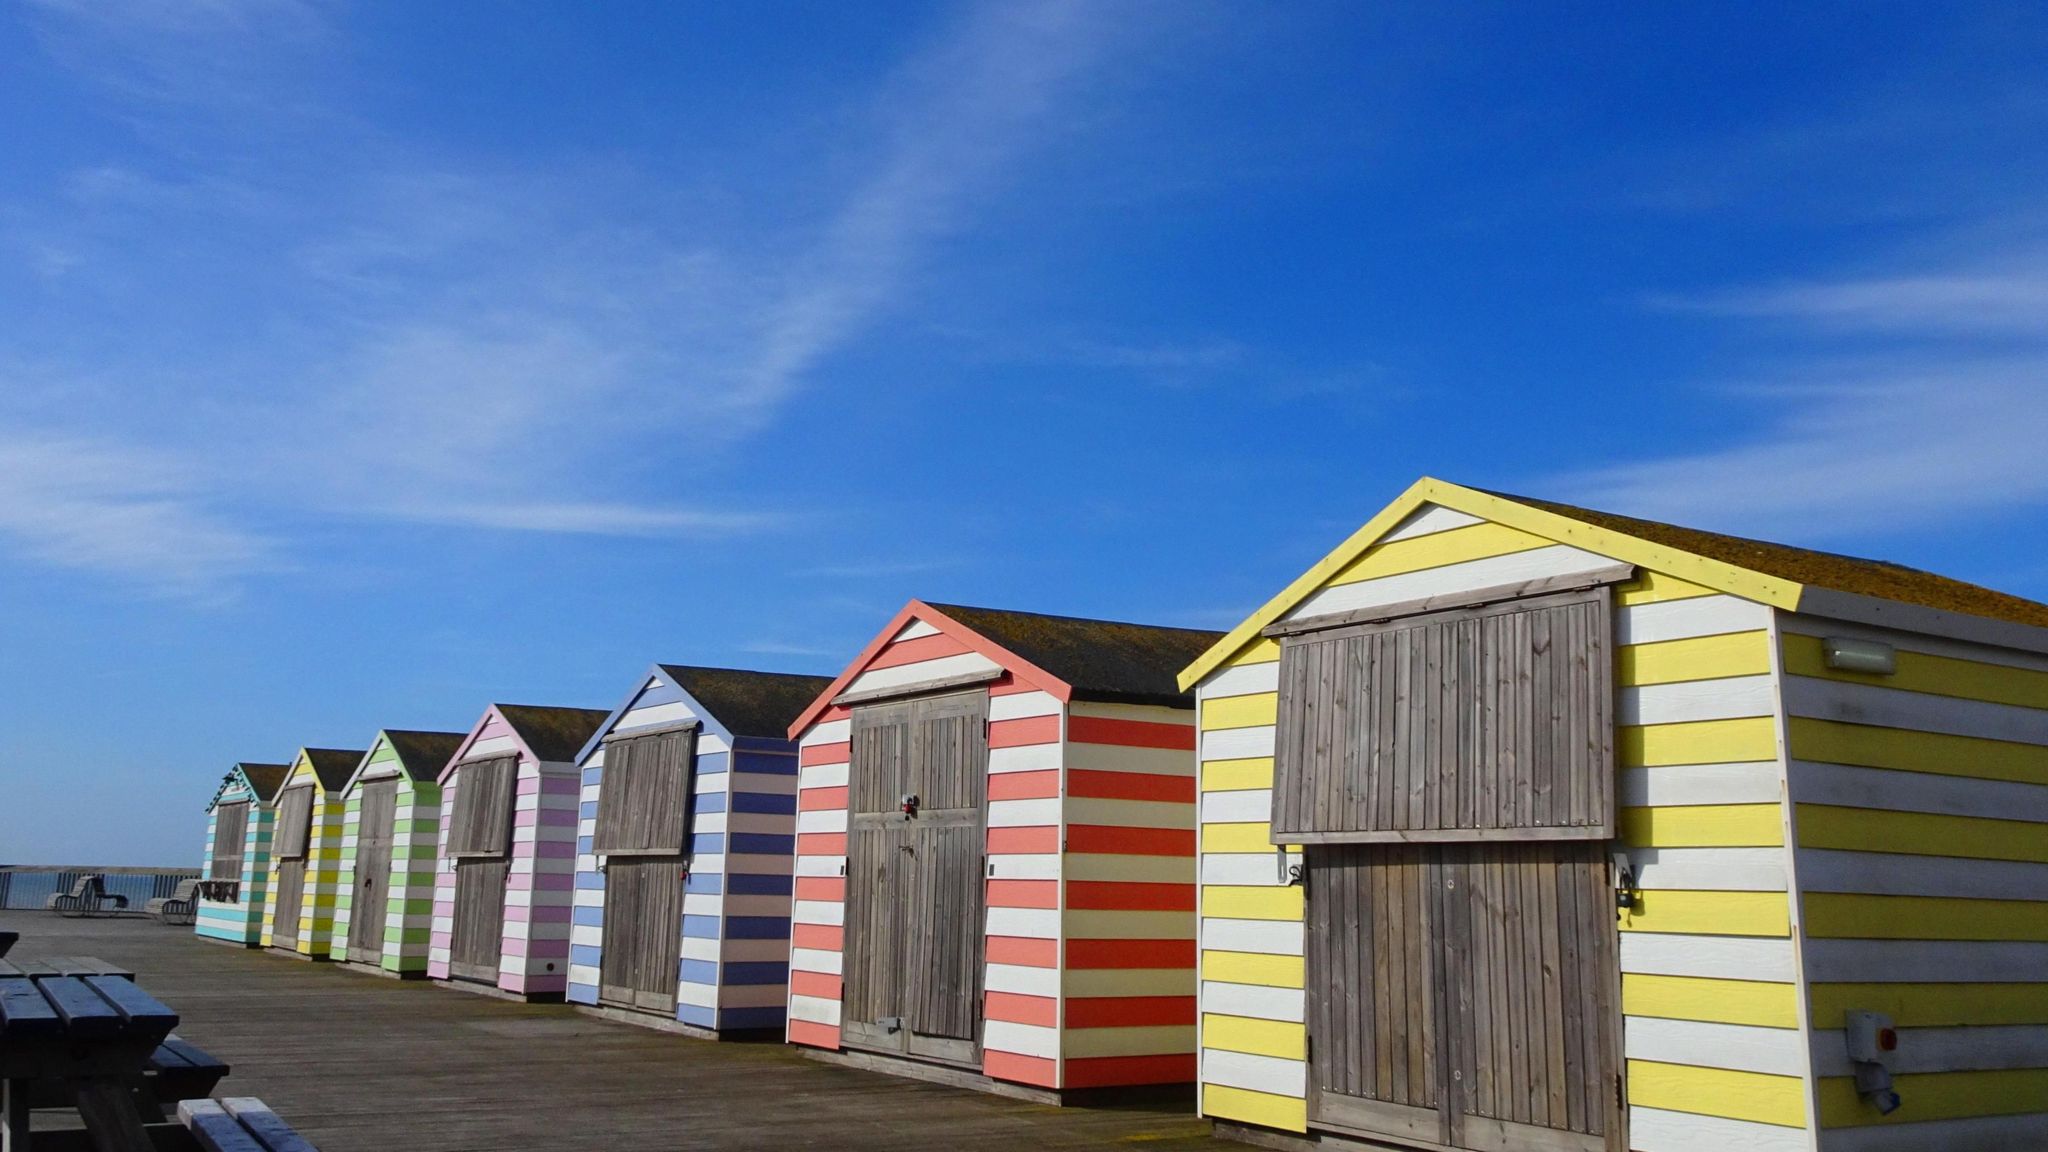 Hazy cloud in a blue sky above a row of seven beach huts along the coast in Hastings, East Sussex